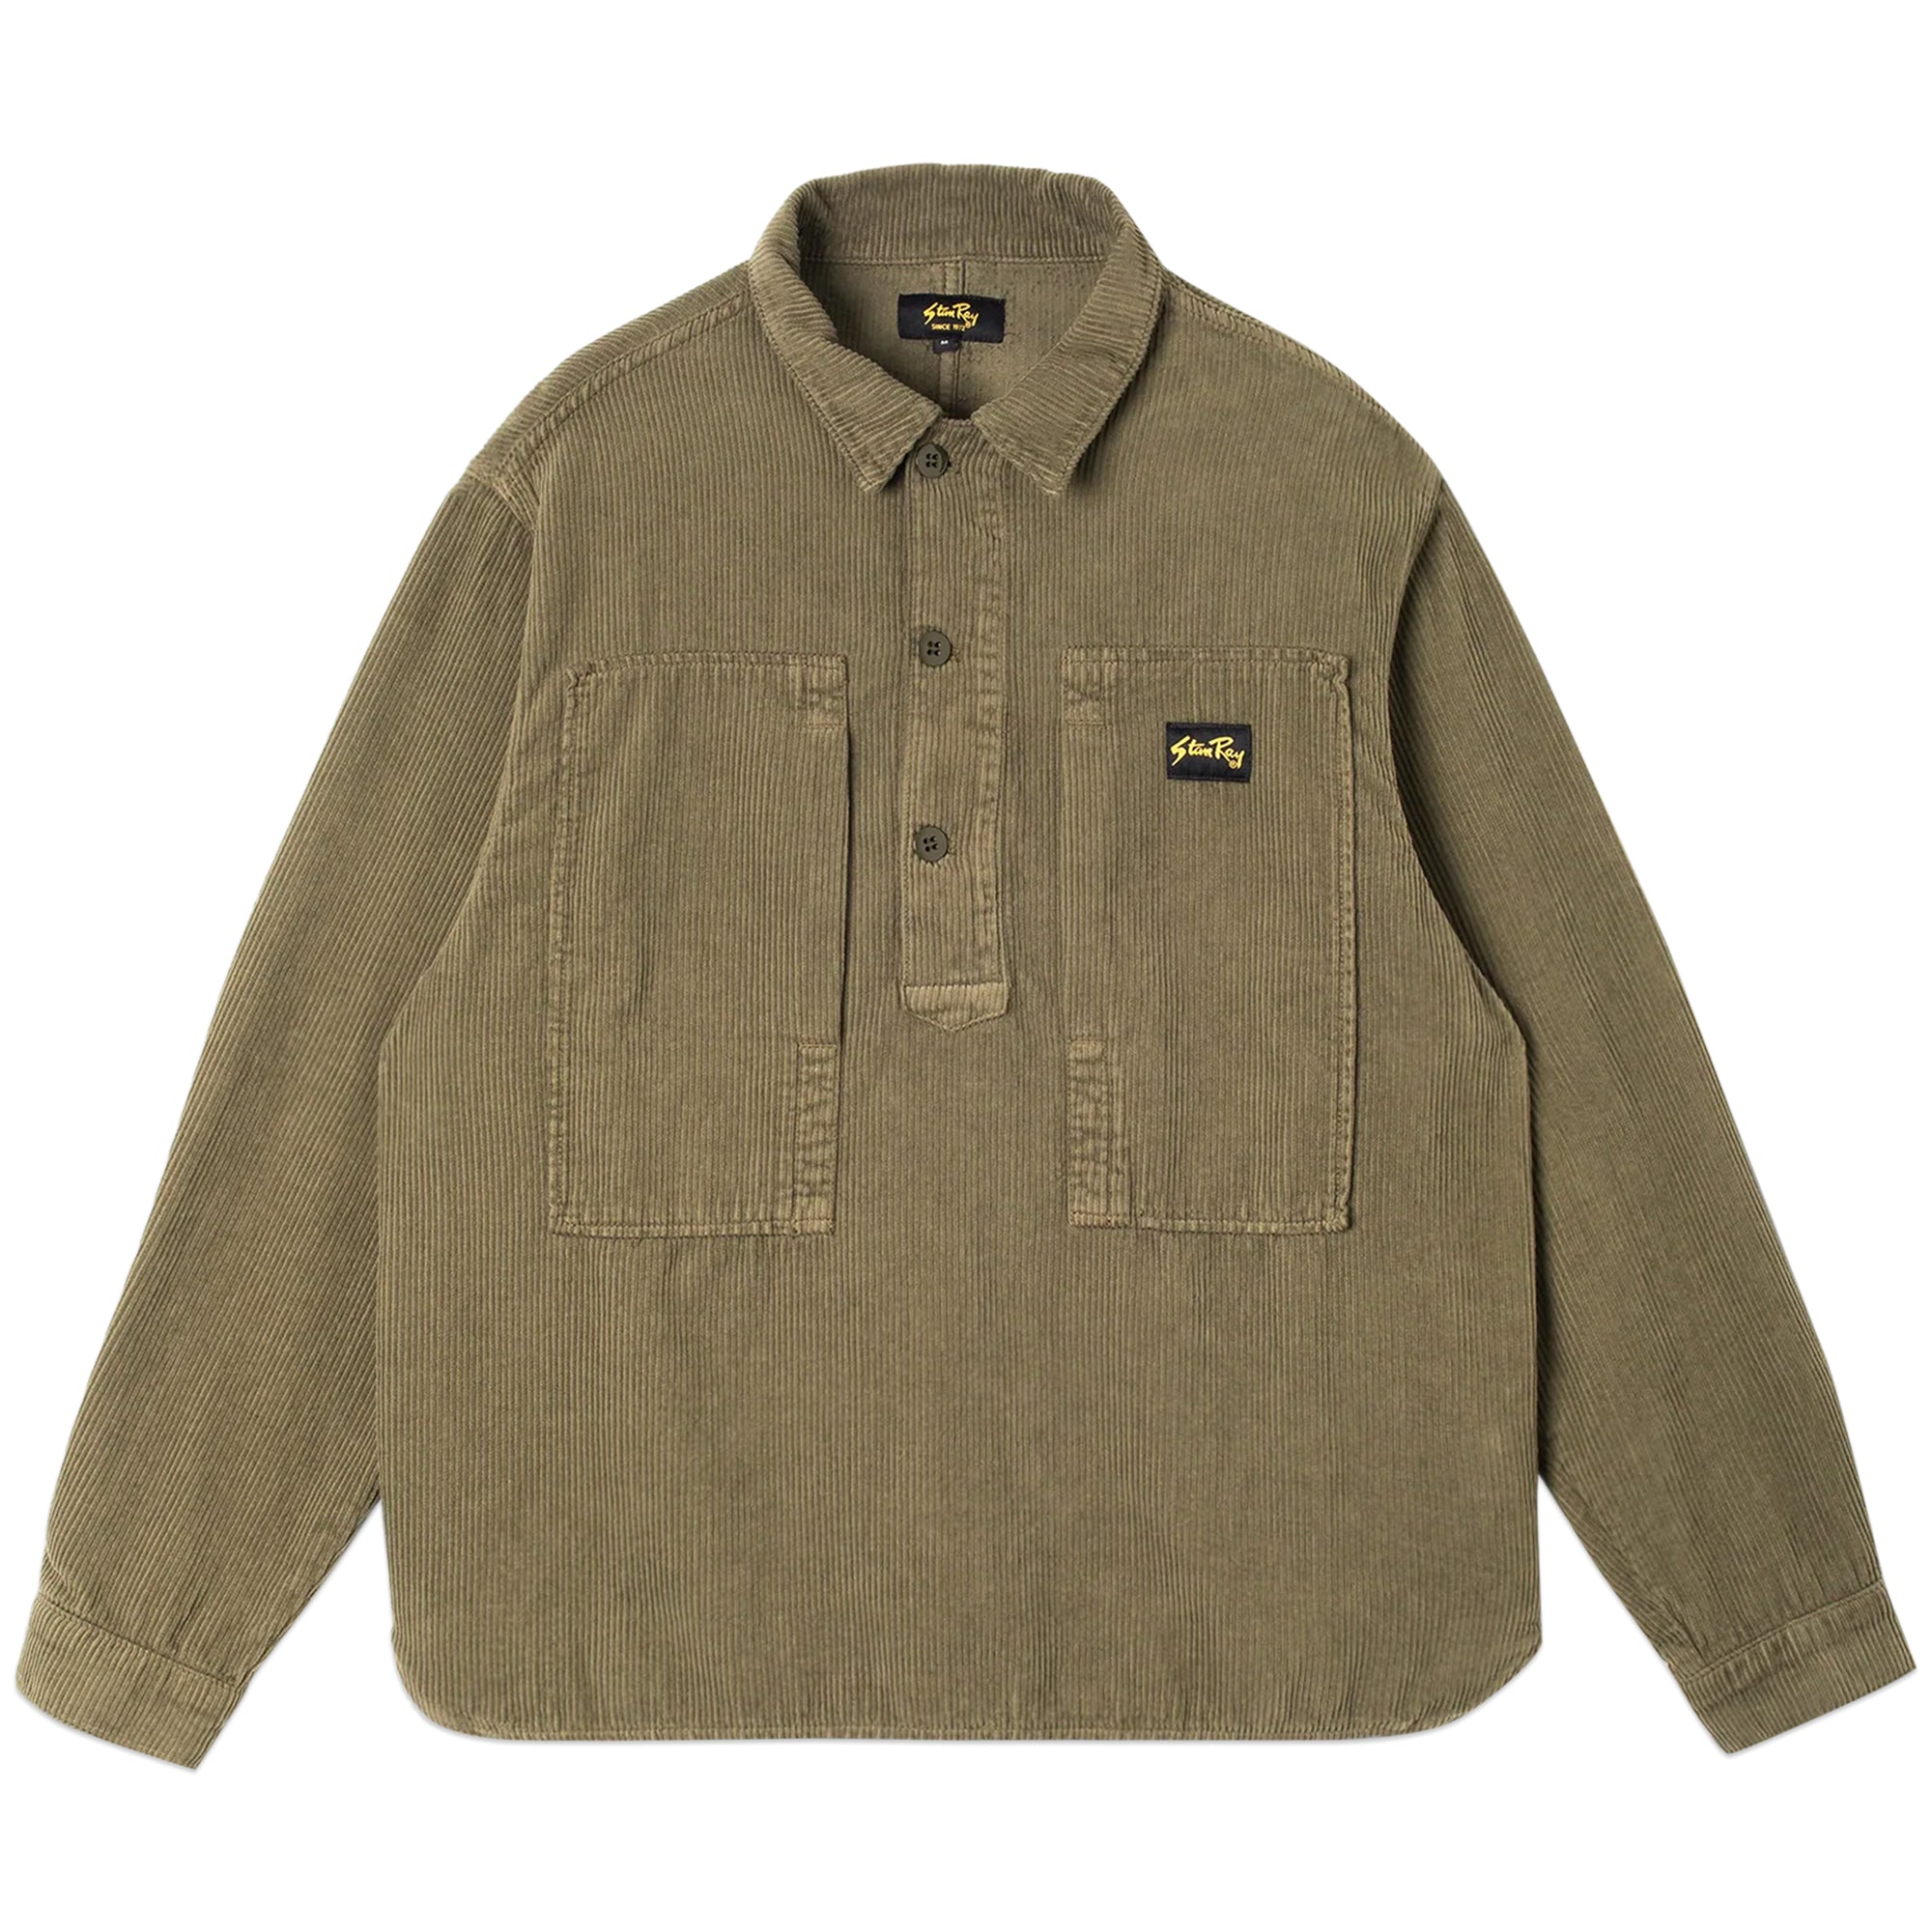 Stan Ray Painters Shirt - Olive Cord